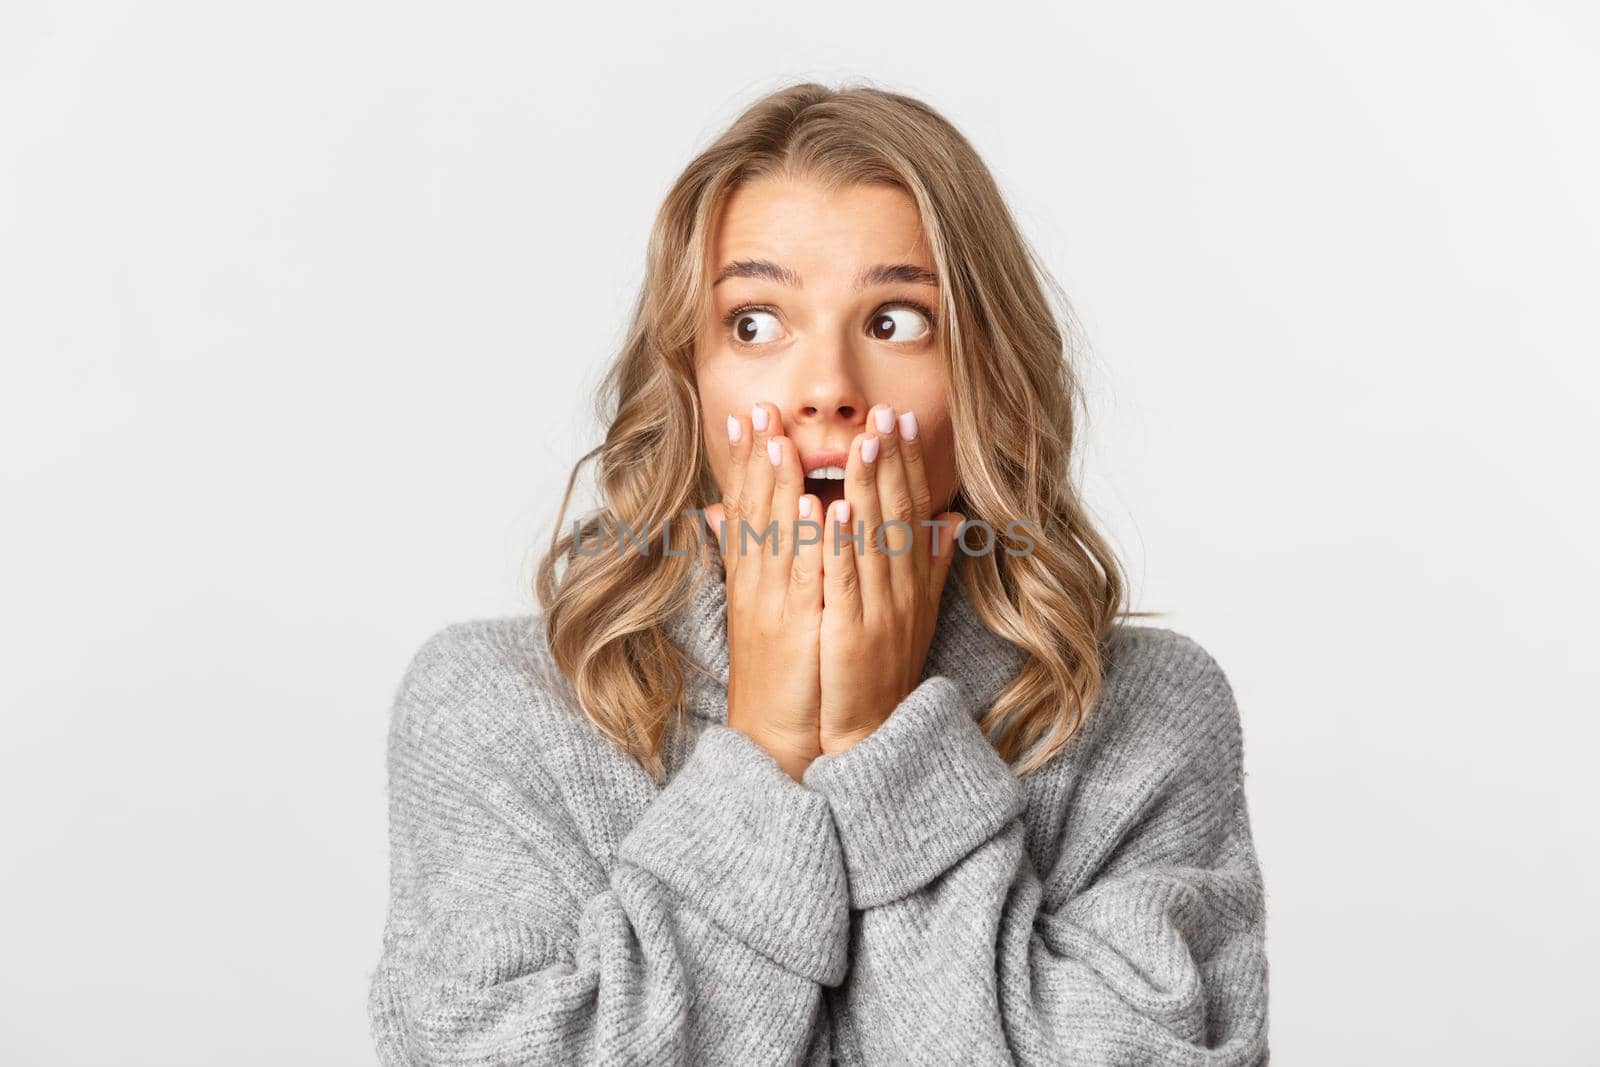 Close-up of shocked and surprised blond girl in grey sweater, looking at upper left corner, gasping amazed, standing over white background.